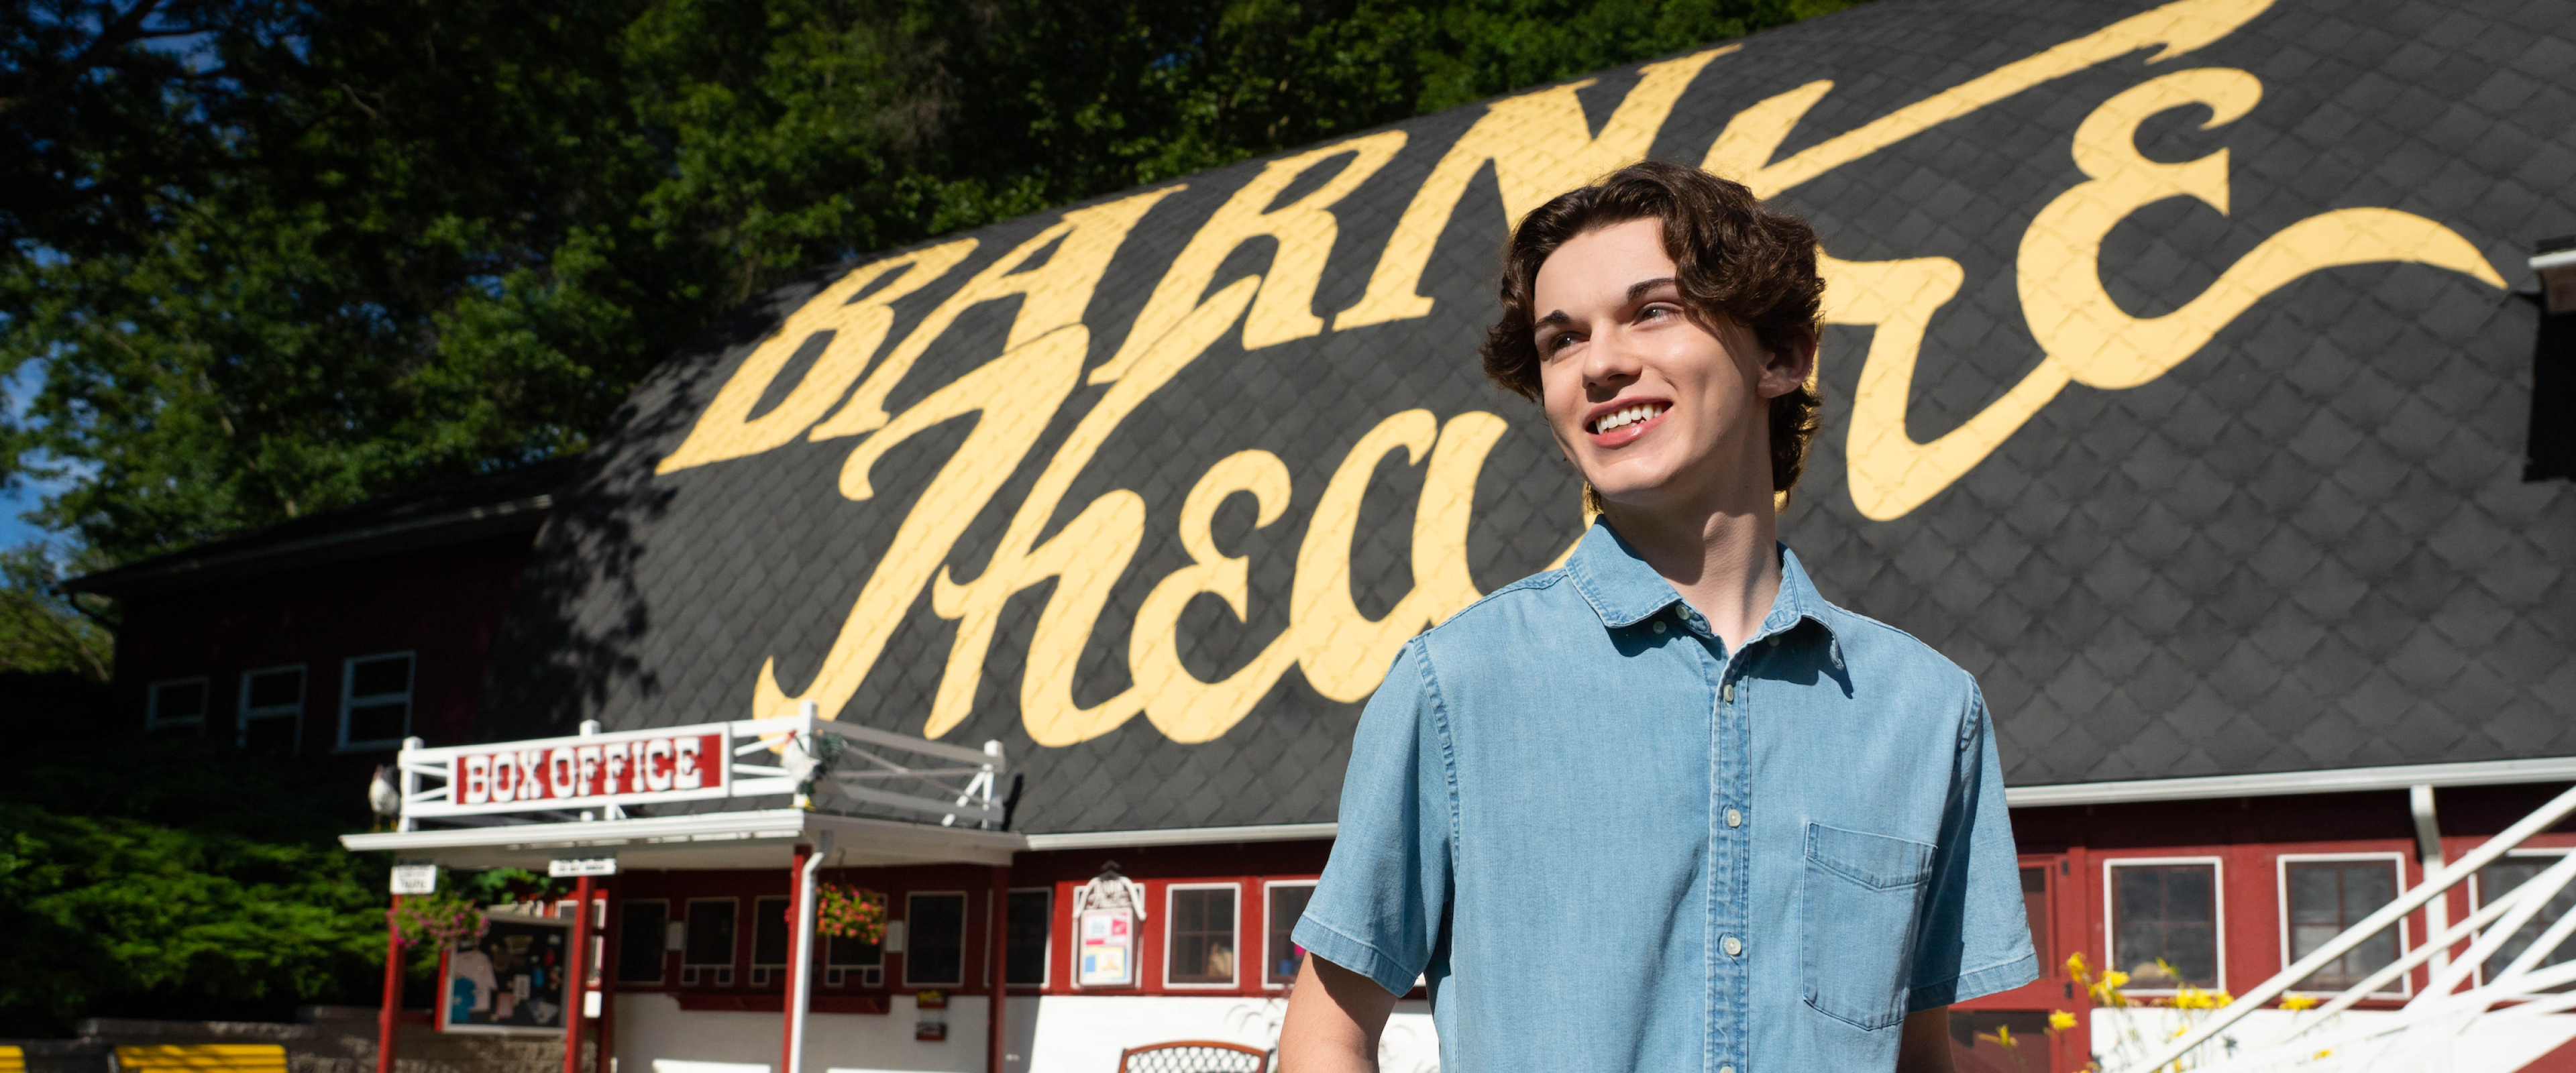 Jack Austin smiles and looks off into the distance while standing in front of the Barn Theatre.